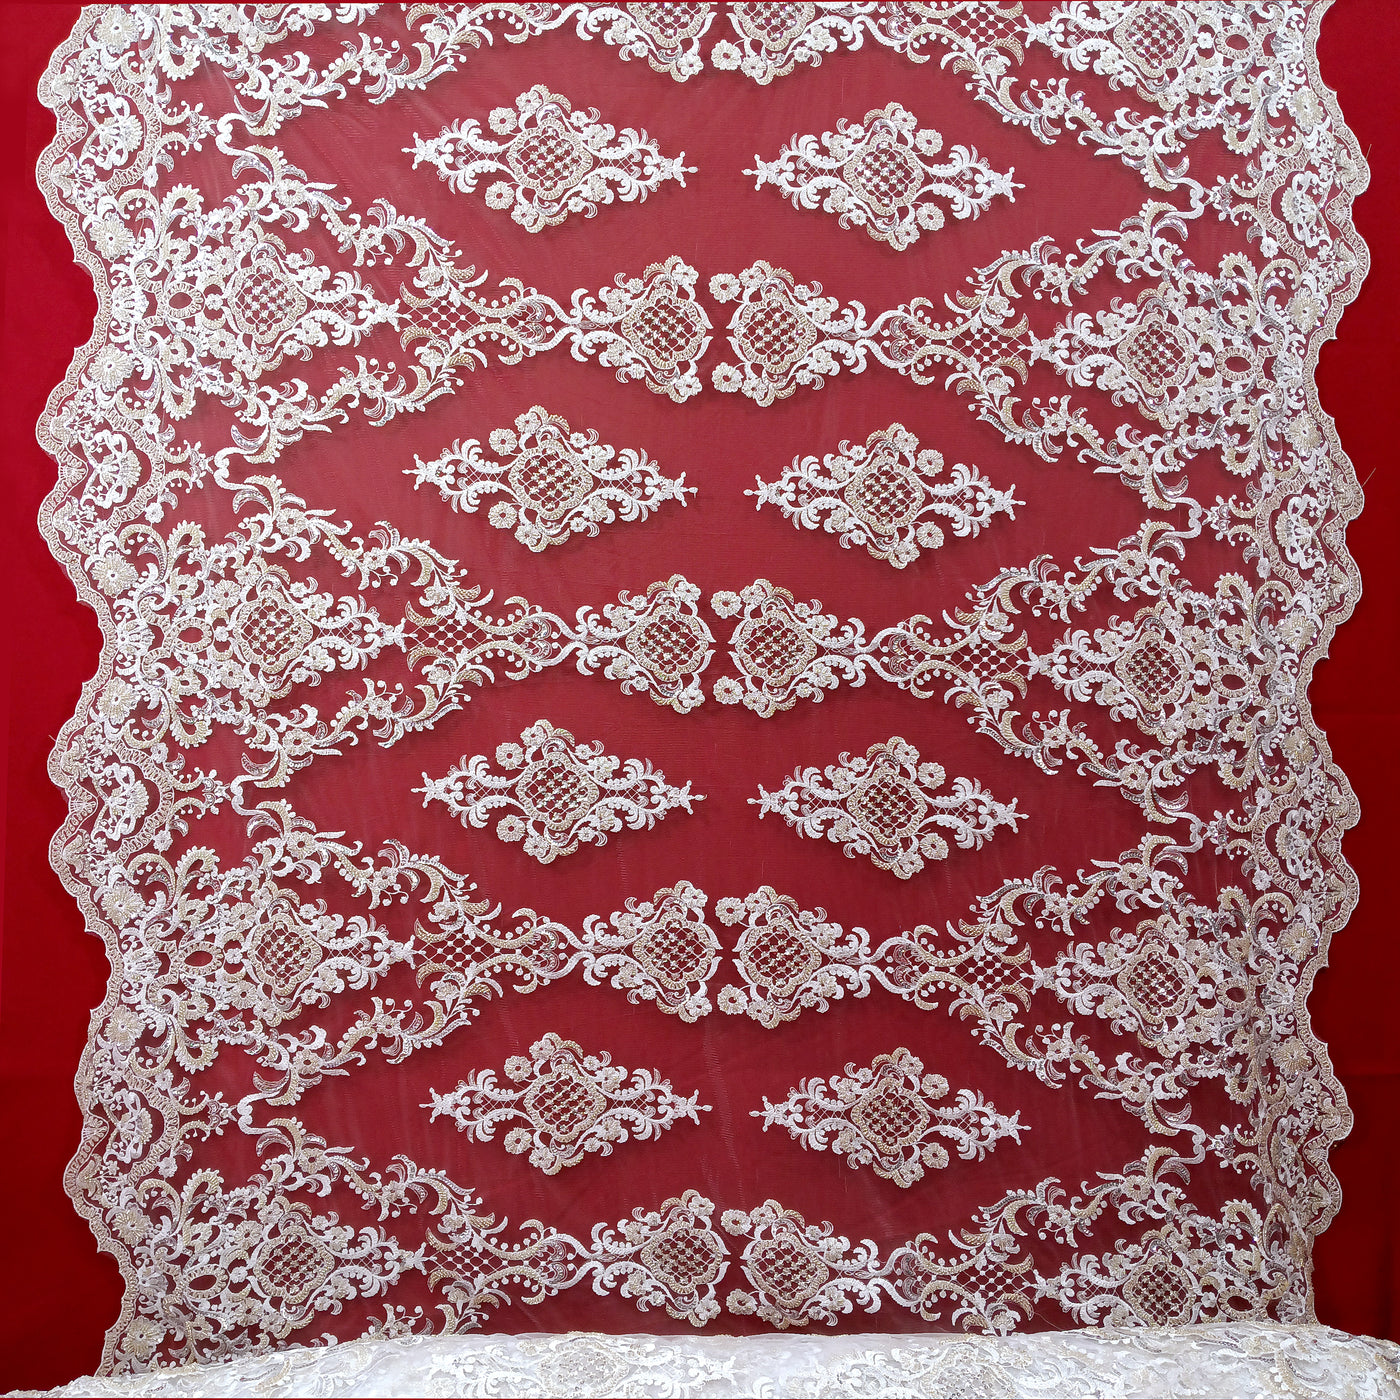 Embroidered & Heavy Beaded Net Fabric with Beads. Lace Usa